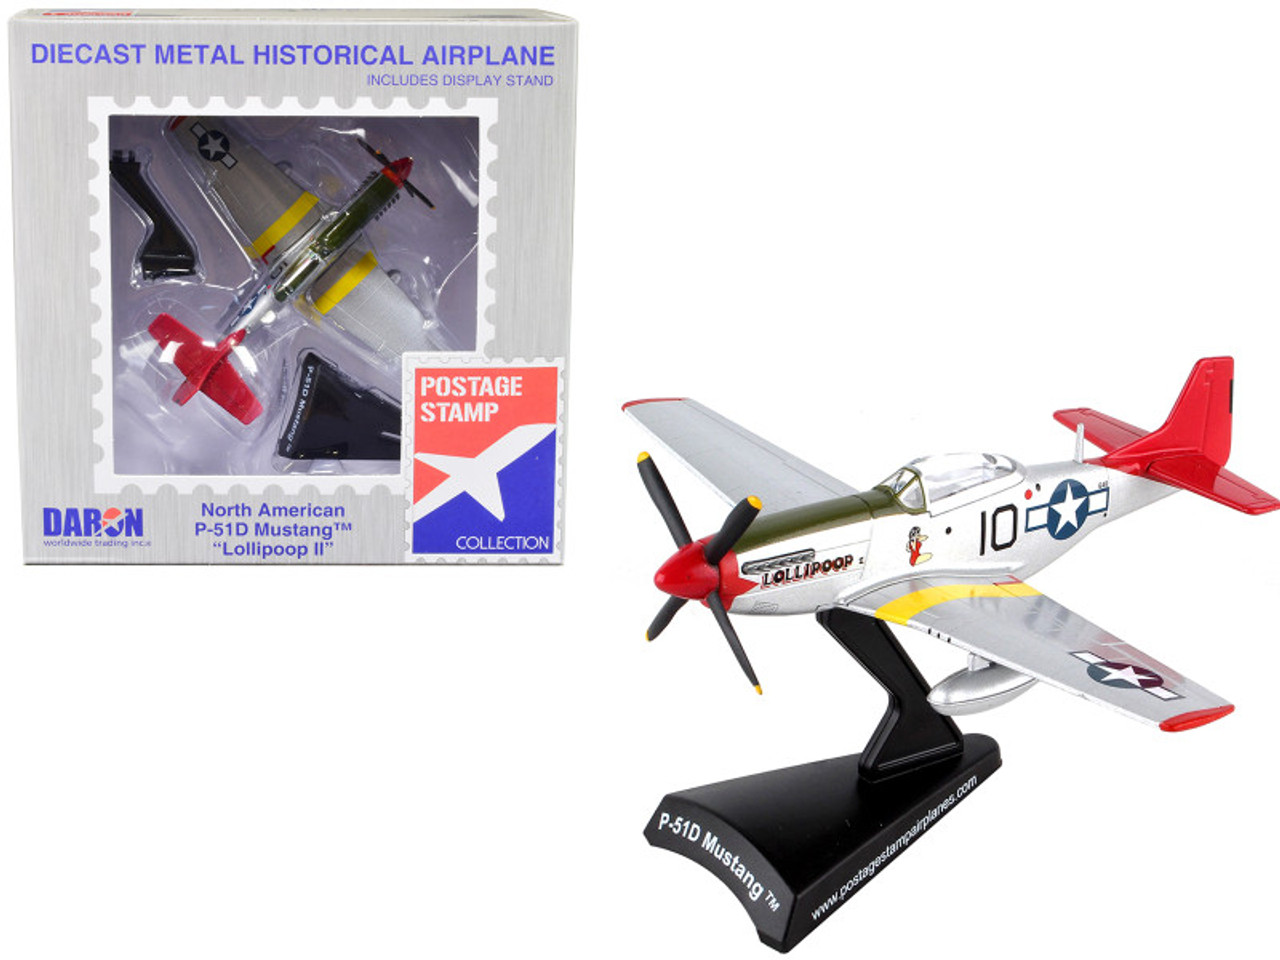 North American P-51D Mustang Fighter Aircraft #10 "Tuskegee" "Lollipoop" United States Army Air Force 1/100 Diecast Model Airplane by Postage Stamp